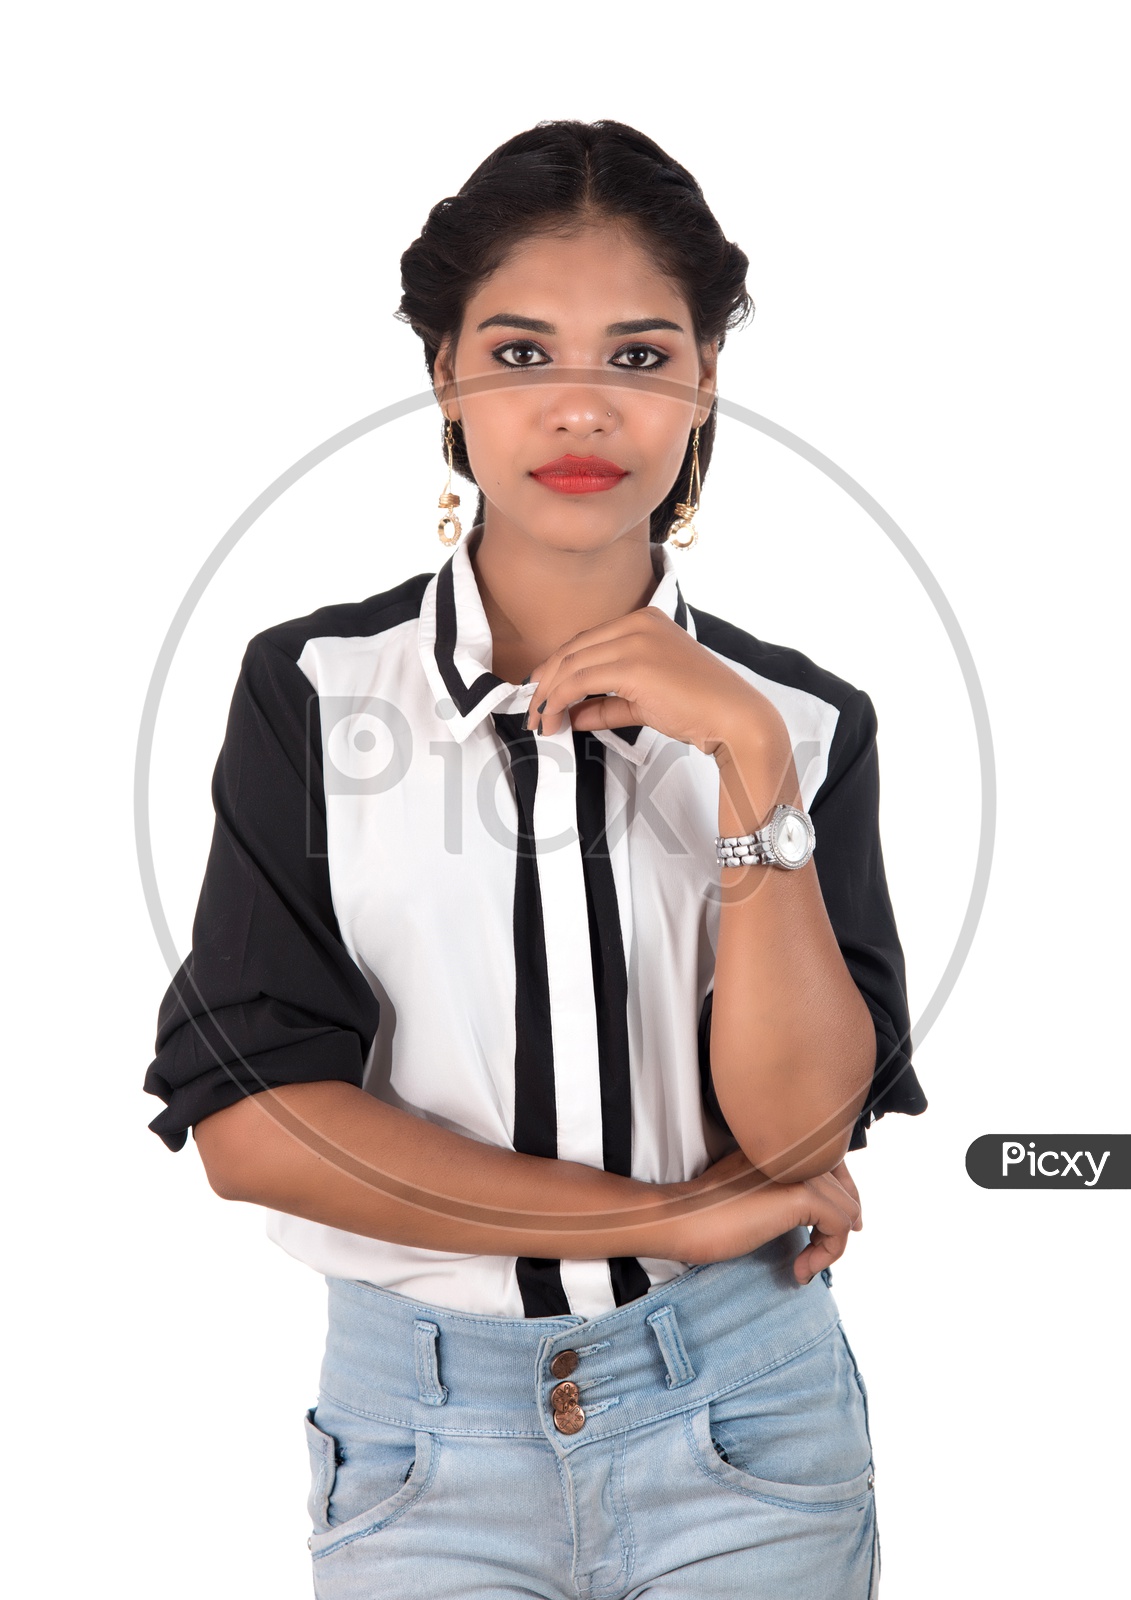 Portrait Of a Young Beautiful Woman Standing And Posing On an Isolated White Background